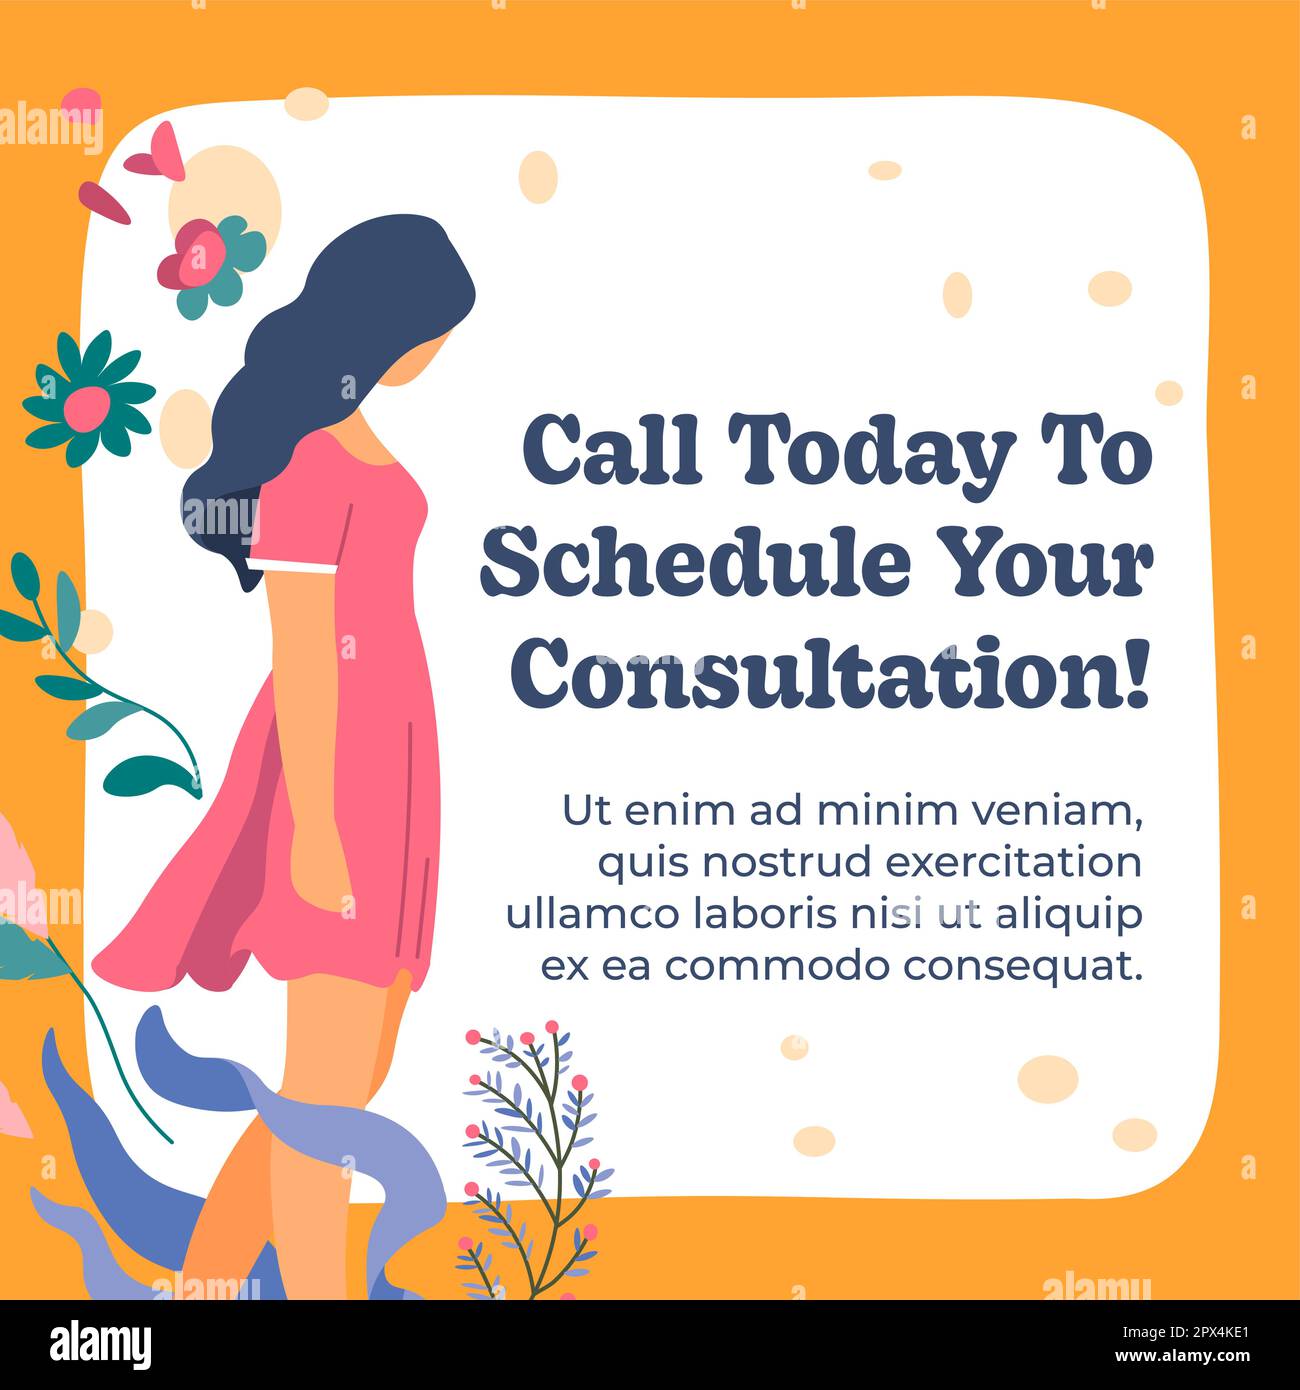 Call today to schedule your consultation banner Stock Vector